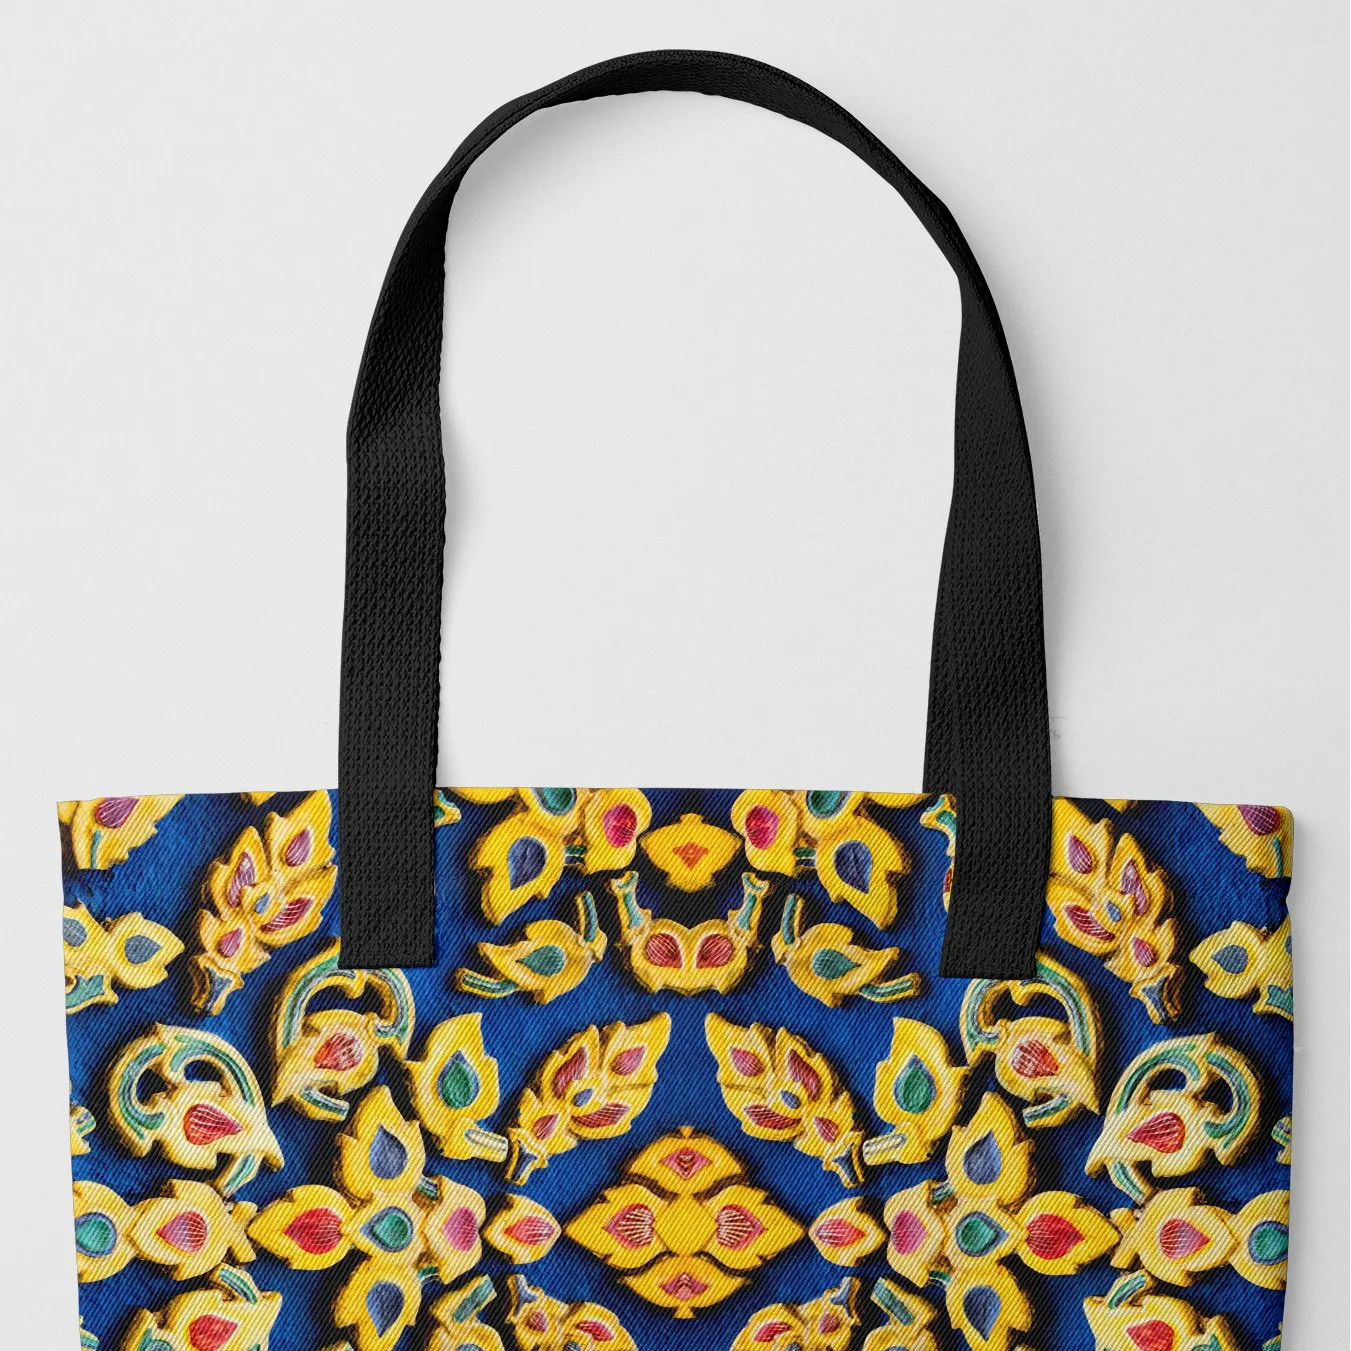 Ayodhya Tote - Heavy Duty Reusable Grocery Bag - Black Handles - Shopping Totes - Aesthetic Art